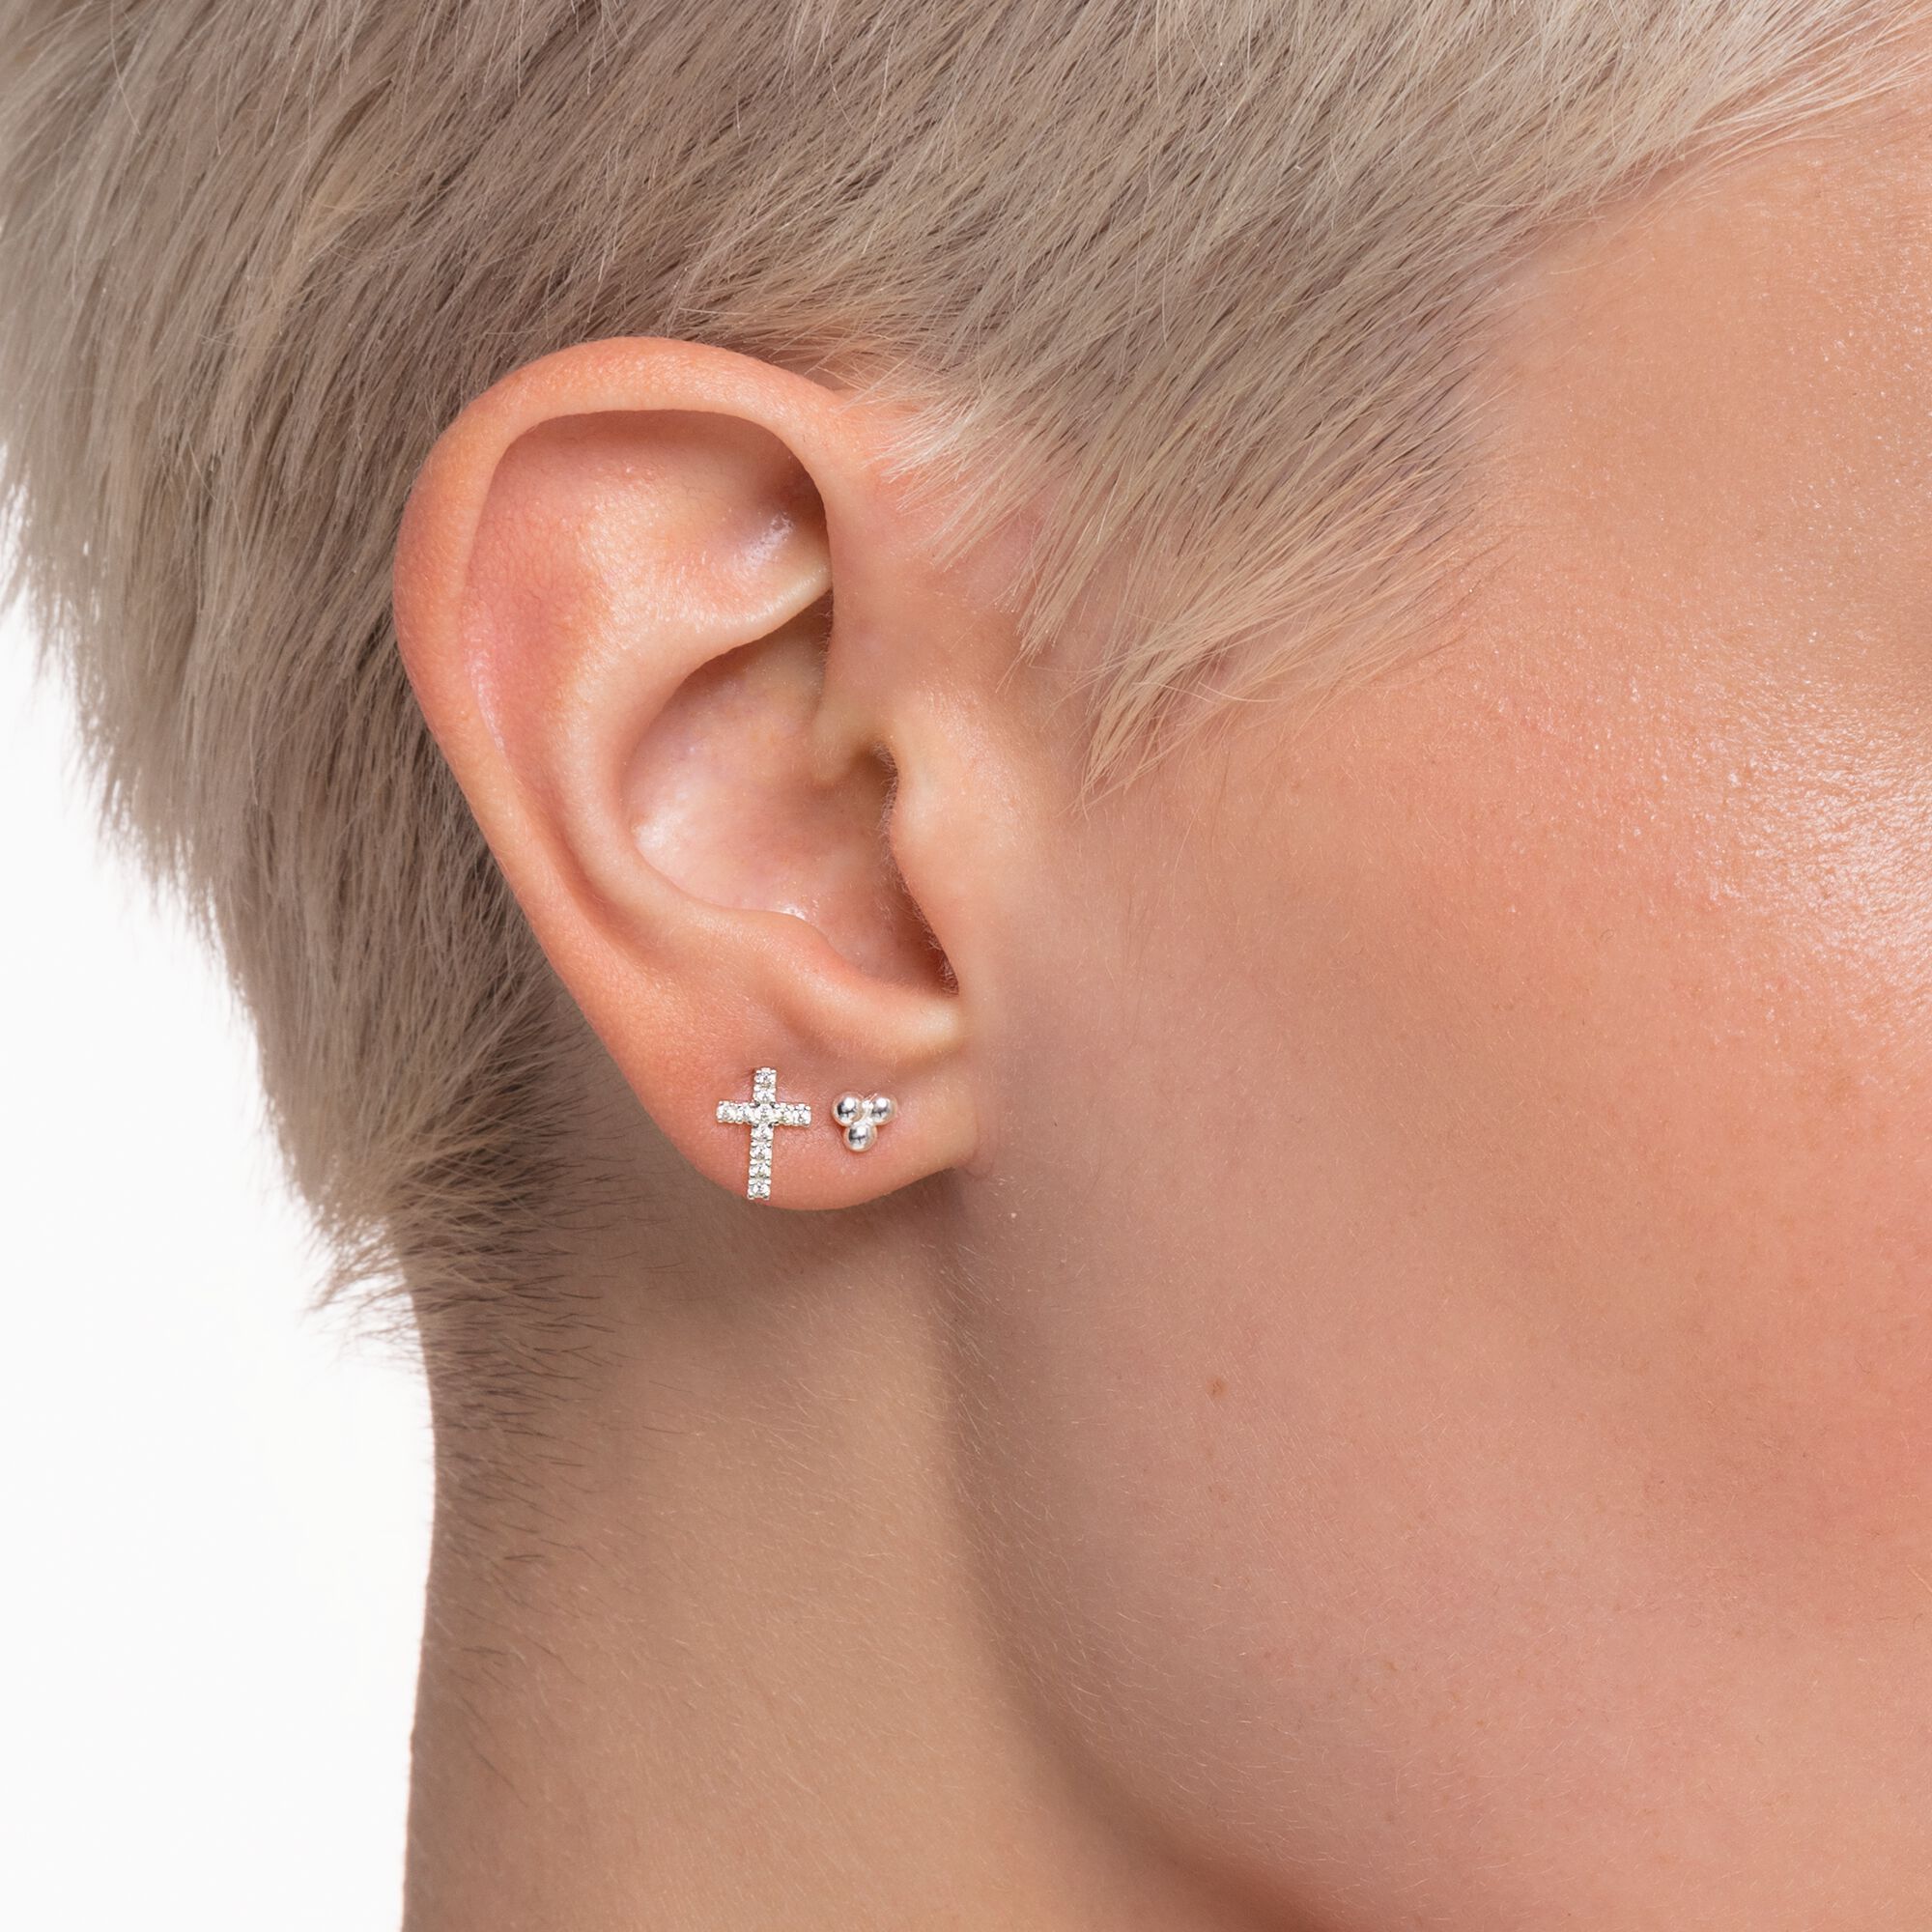 in │ Ear Small SABO stud geometrical THOMAS silver: bubbles